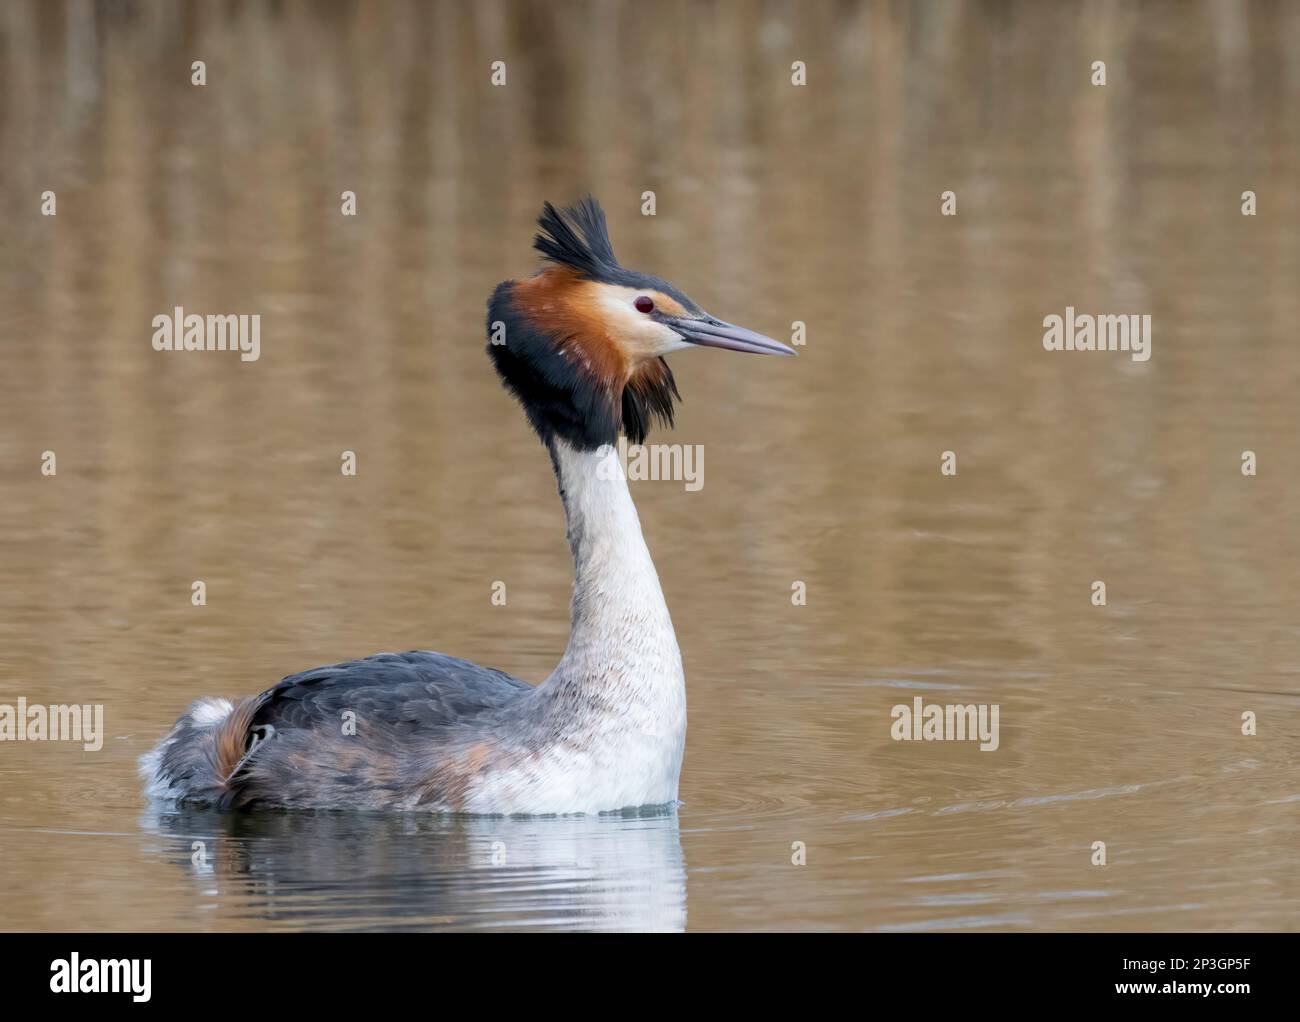 An elegant Great Crested Grebe, (Podiceps cristatus), swims on a lake in front of a reed bed in Fleetwood, Blackpool, Lancashire, UK Stock Photo